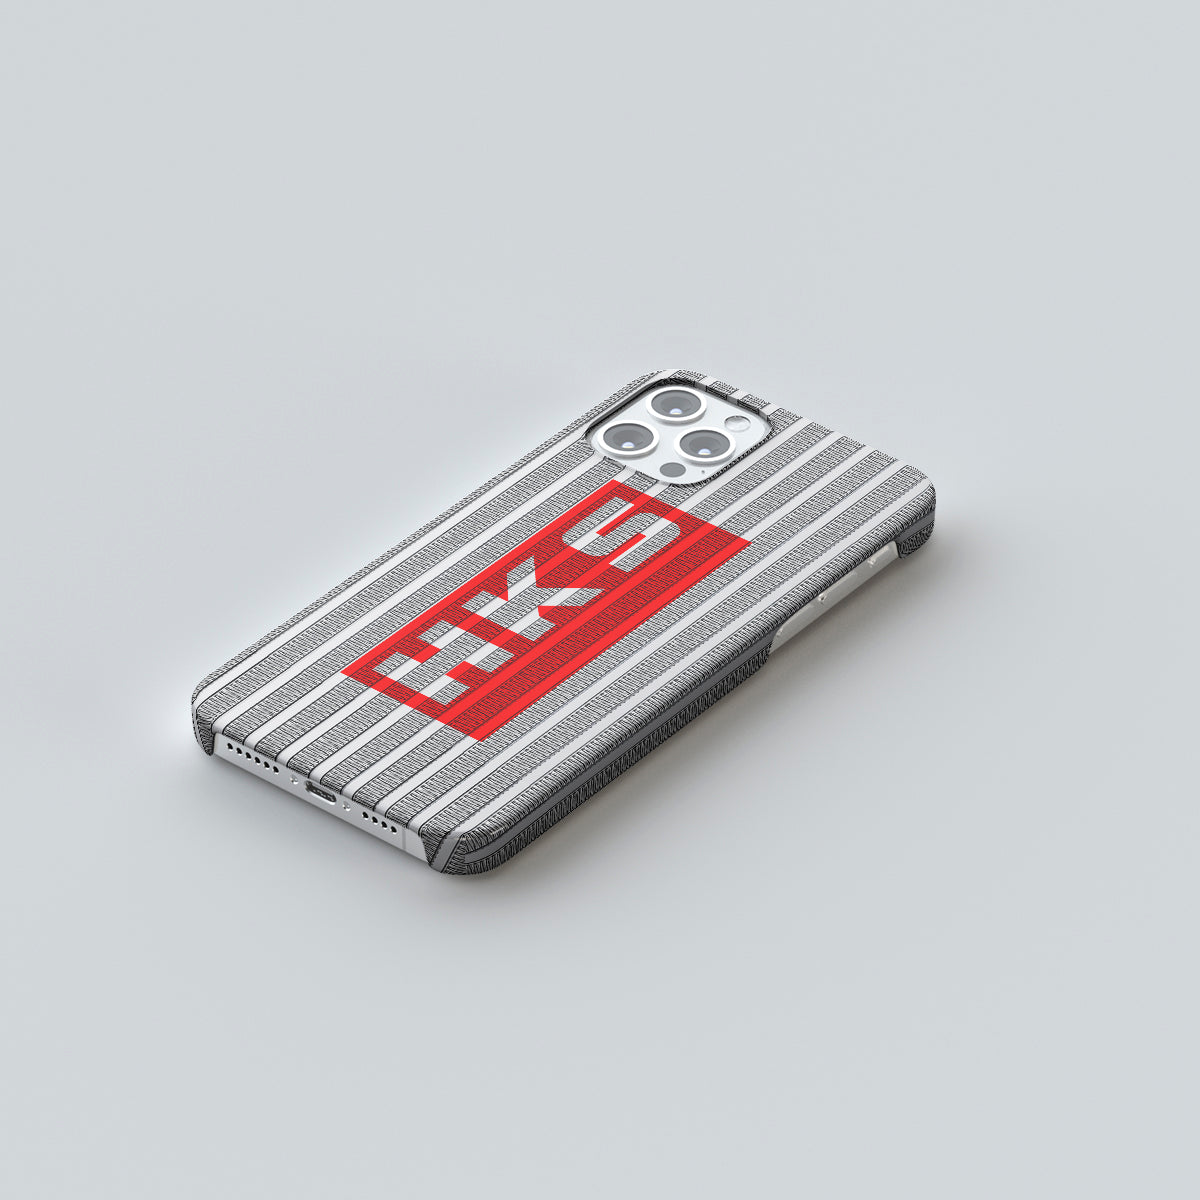 Side view of a silver and red HKS Aluminum phone case